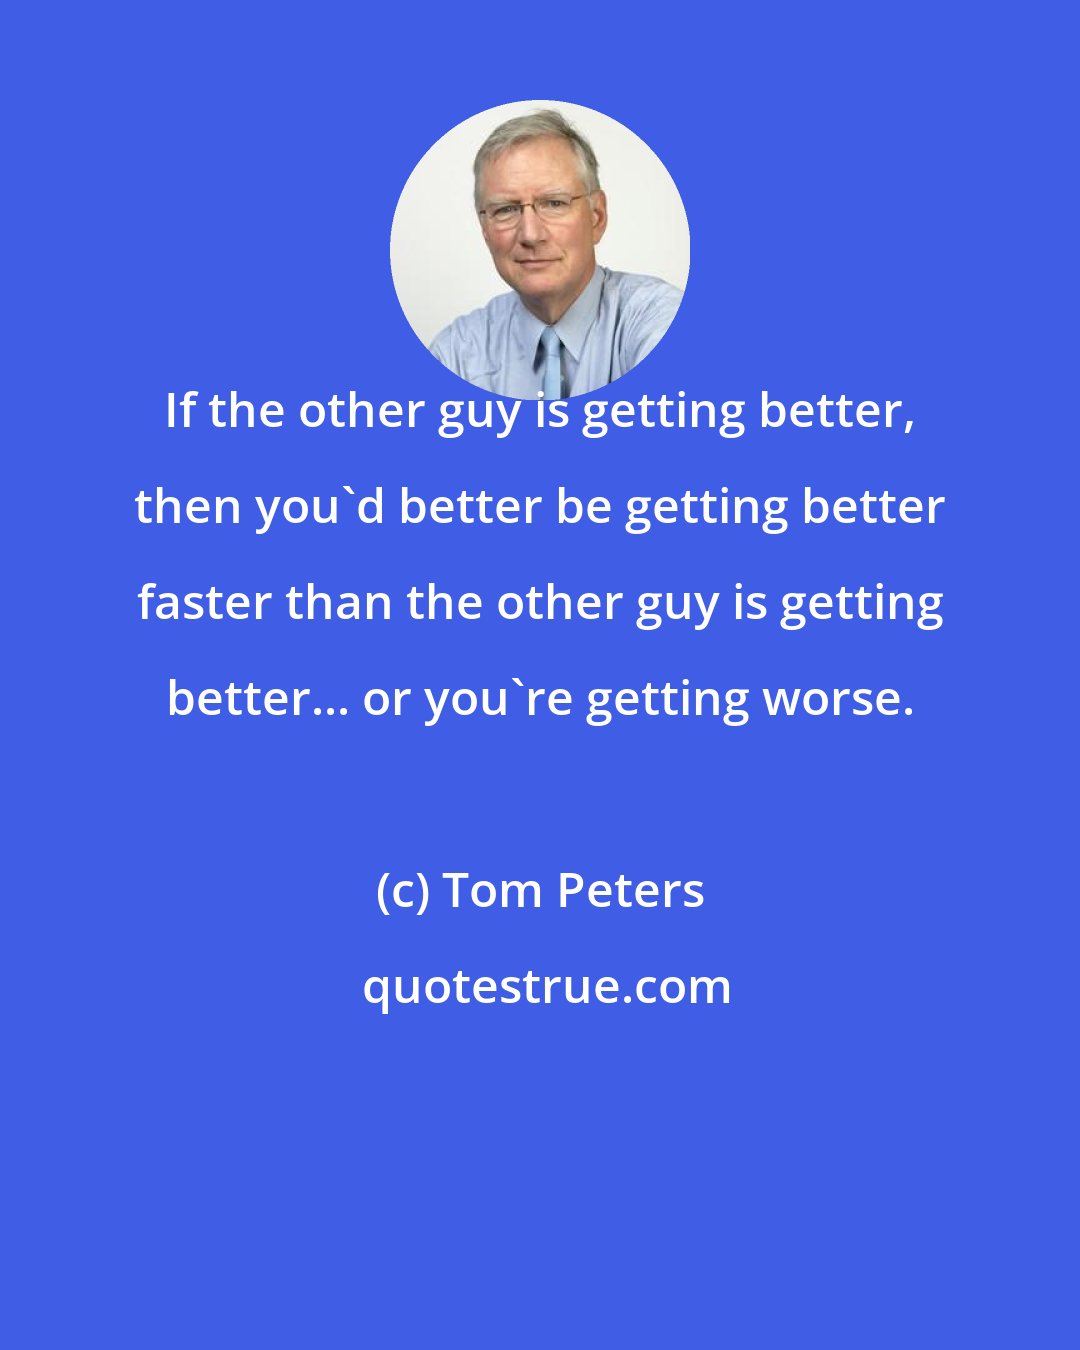 Tom Peters: If the other guy is getting better, then you'd better be getting better faster than the other guy is getting better... or you're getting worse.